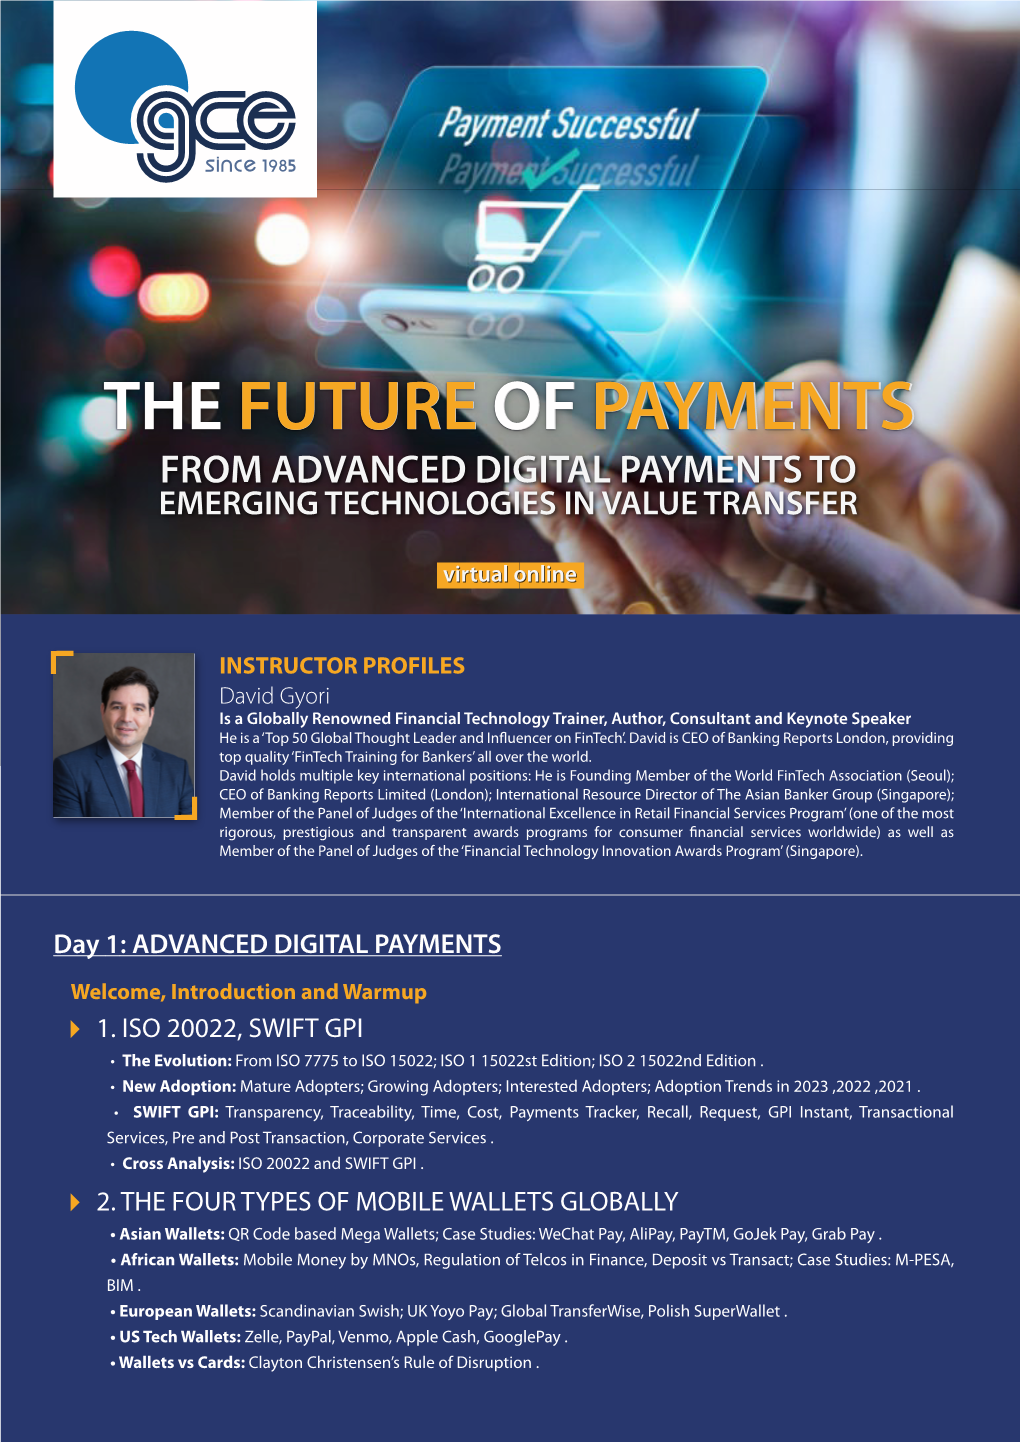 The Future of Payments from Advanced Digital Payments to Emerging Technologies in Value Transfer